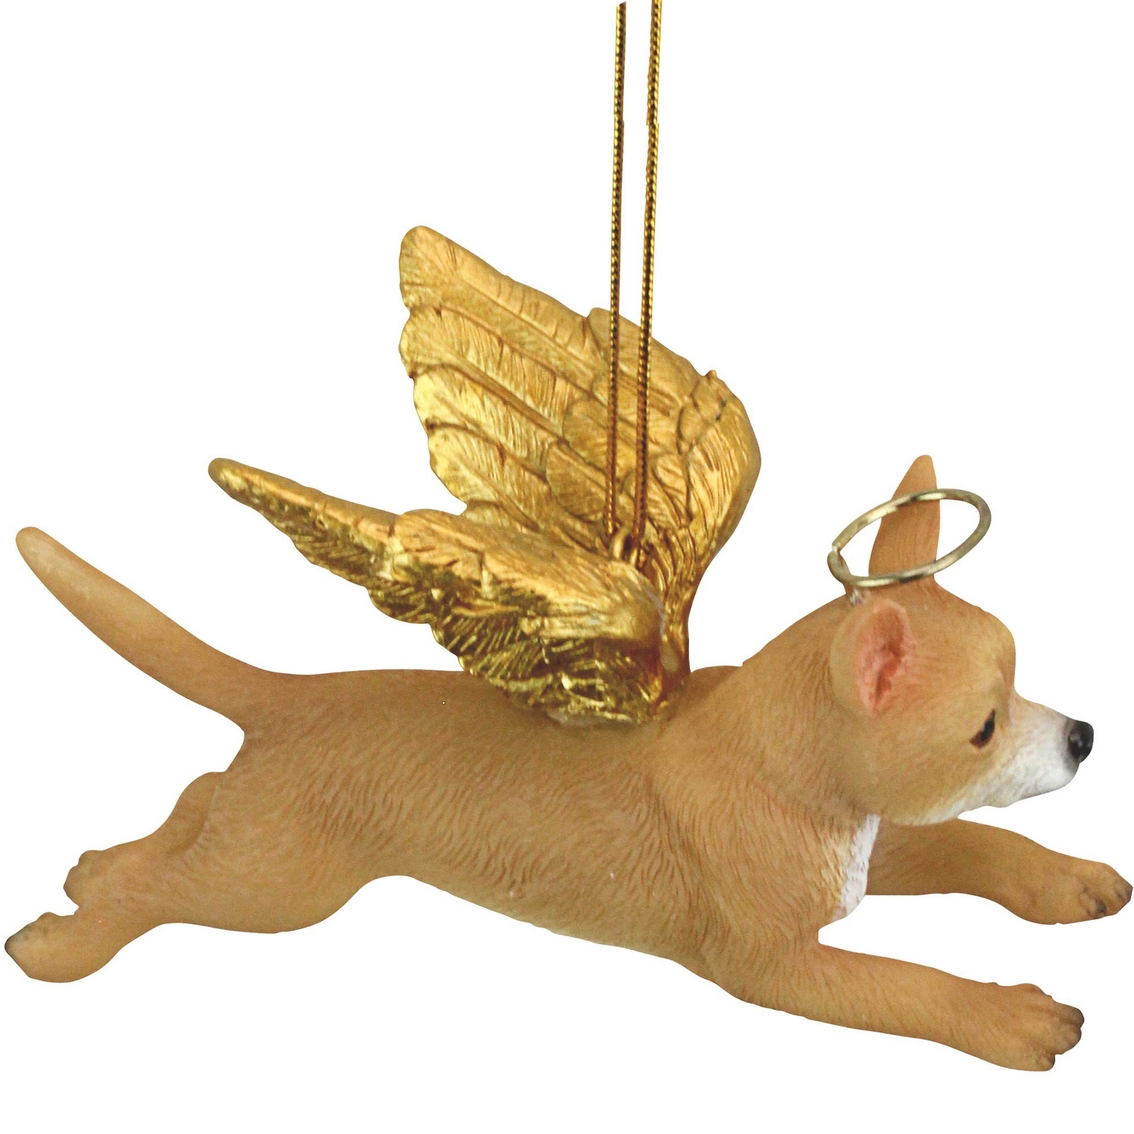 Design Toscano Honor the Pooch - Chihuahua Holiday Dog Angel Ornament - Image 3 of 4